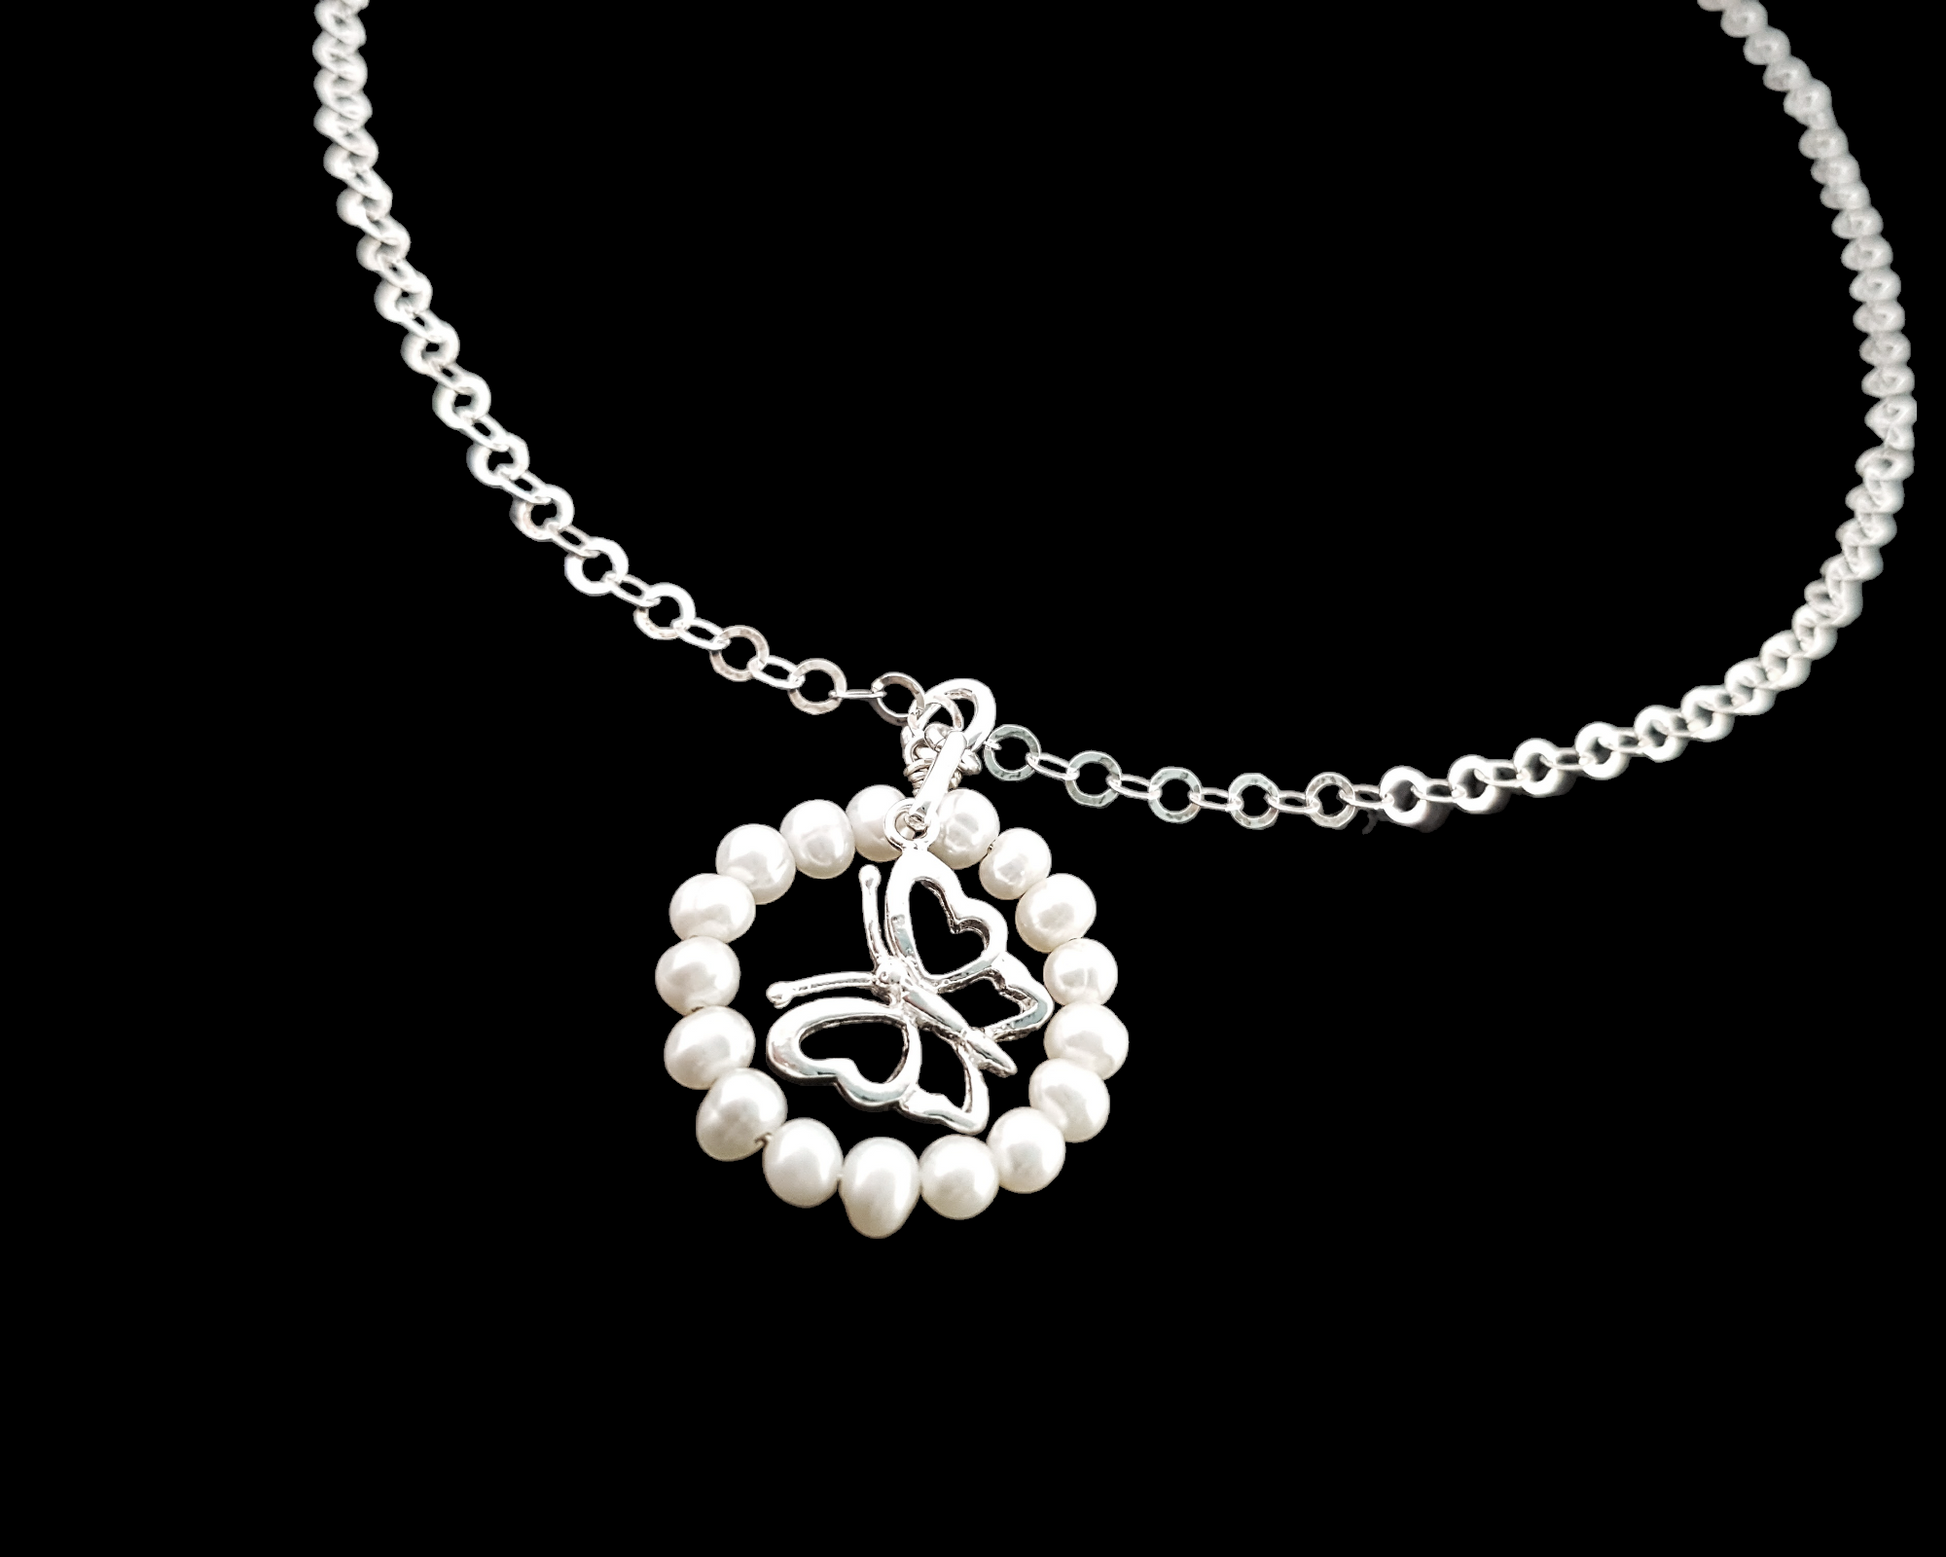 Butterfly Pearl Eternity Necklace-Sterling Silver Butterfly inside a White Freshwater Cultured Pearl Eternity Ring Pendant on Sparkly chain.